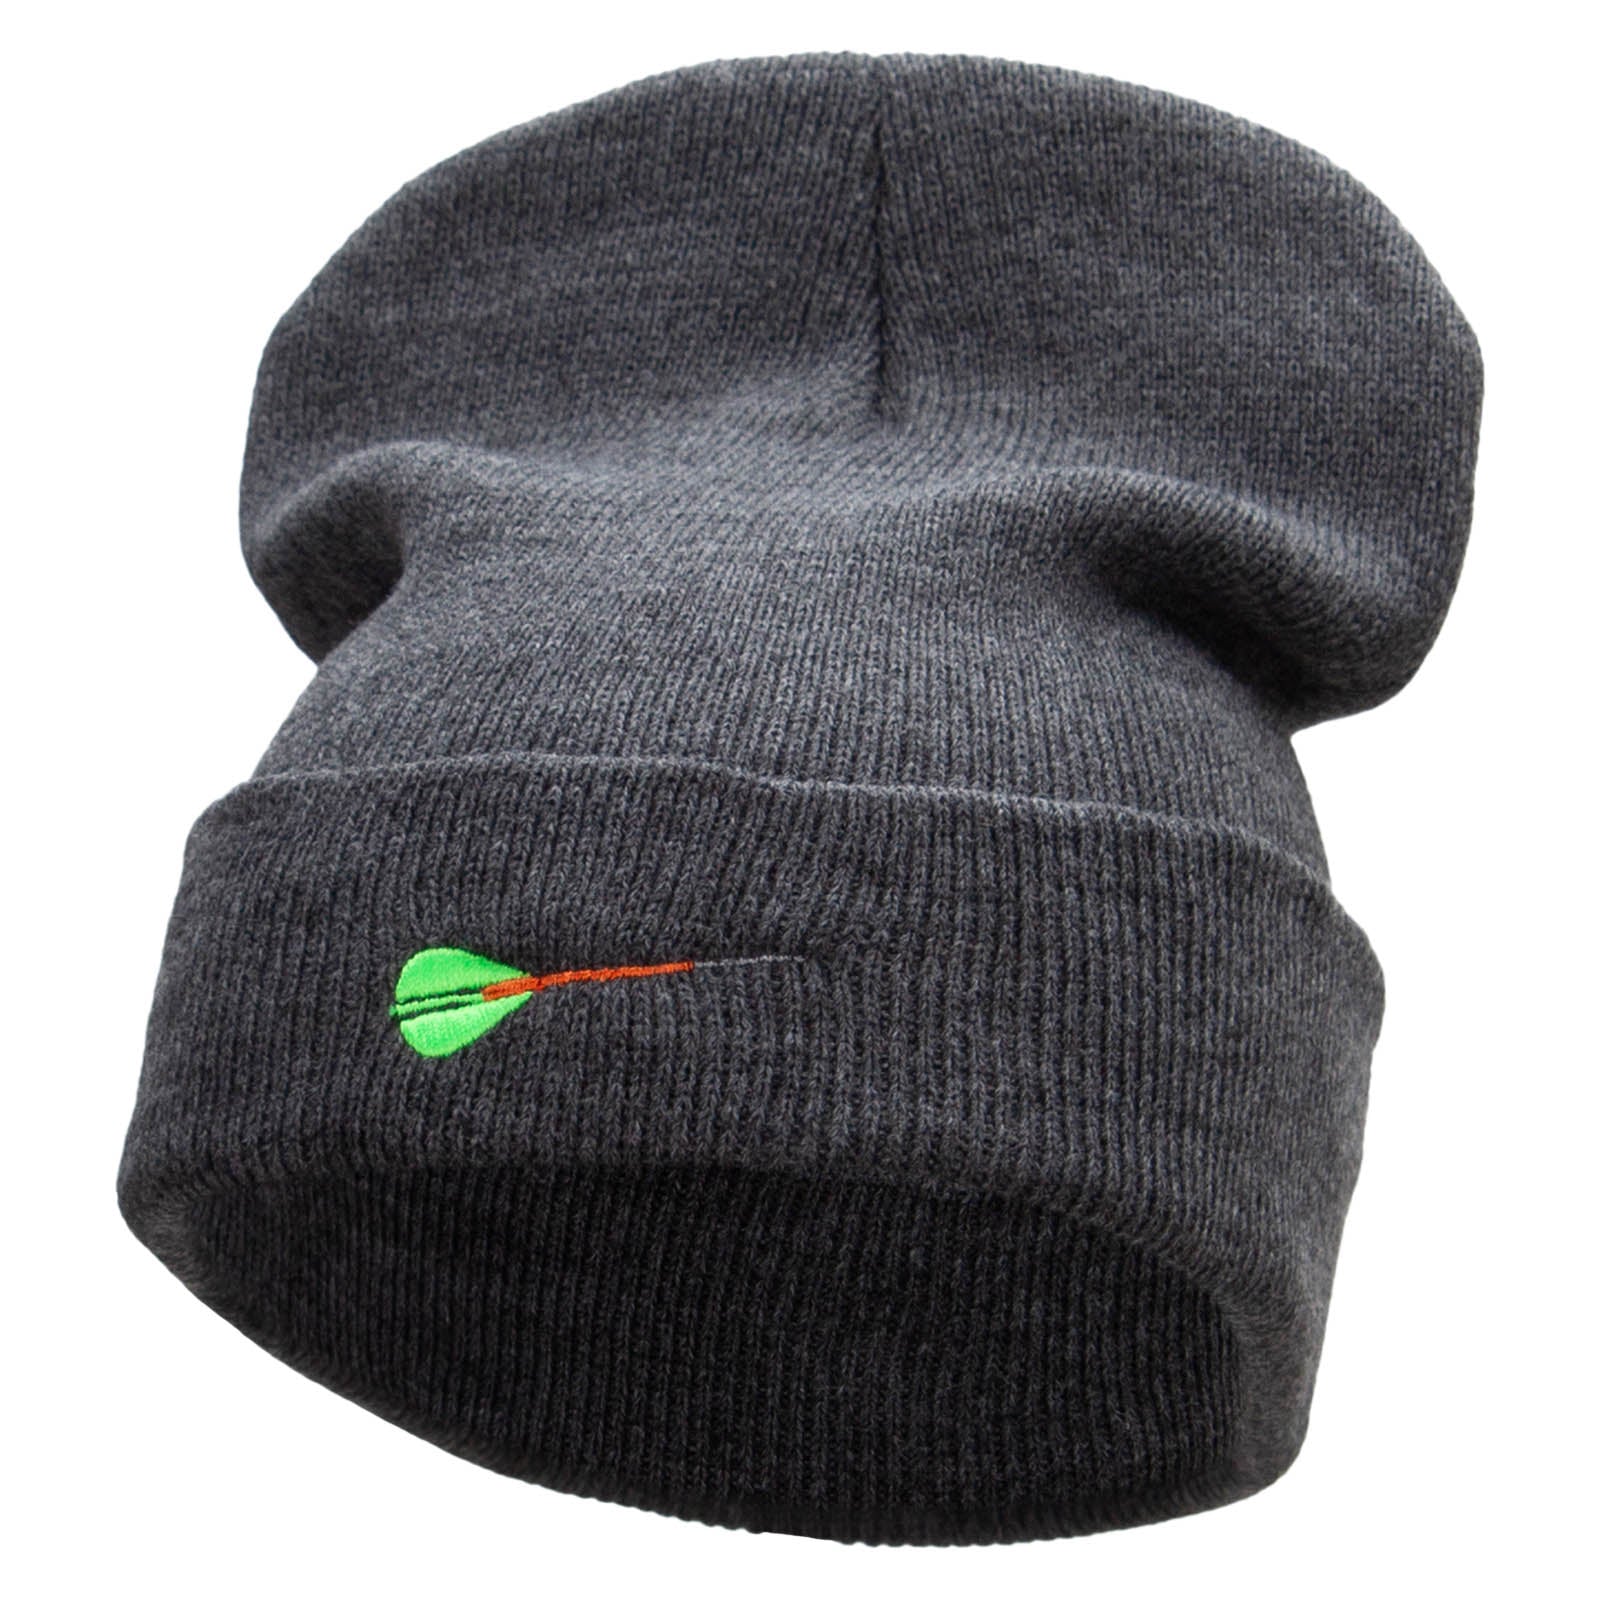 The Dart Embroidered 12 Inch Solid Long Beanie Made in USA - Dk Grey OSFM